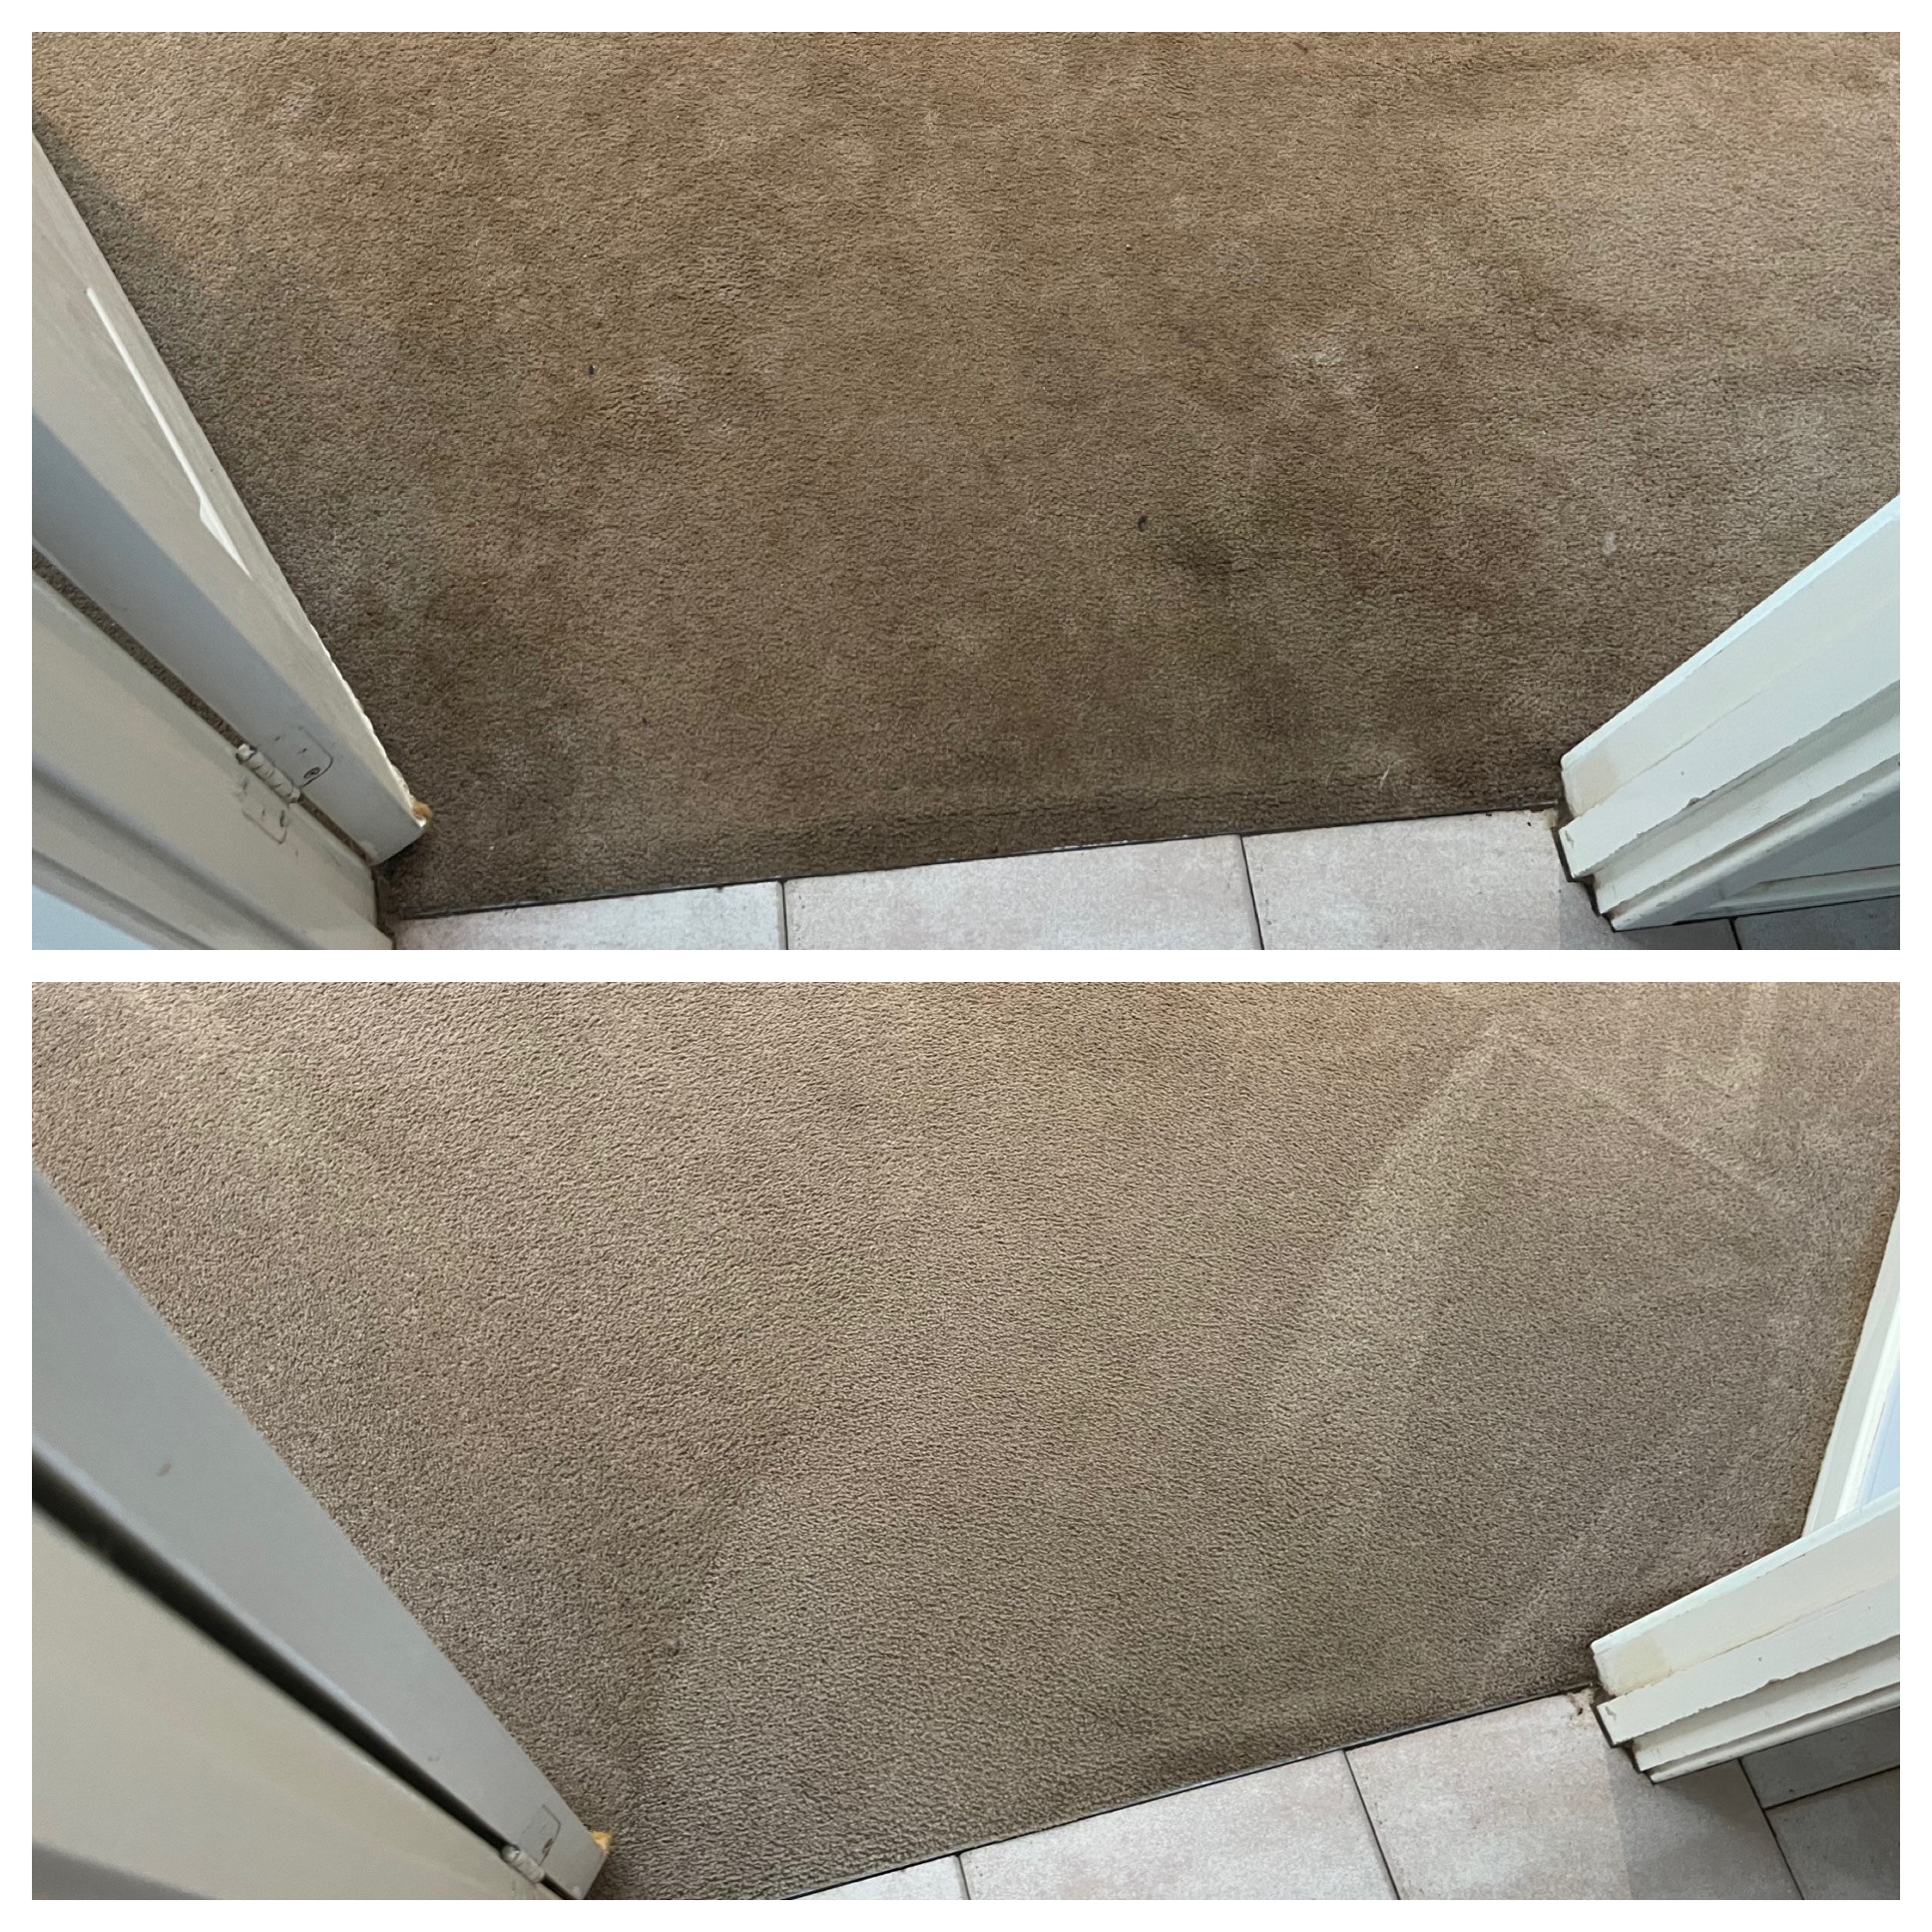 Before/after - clean carpet urine Hunter Valley NSW